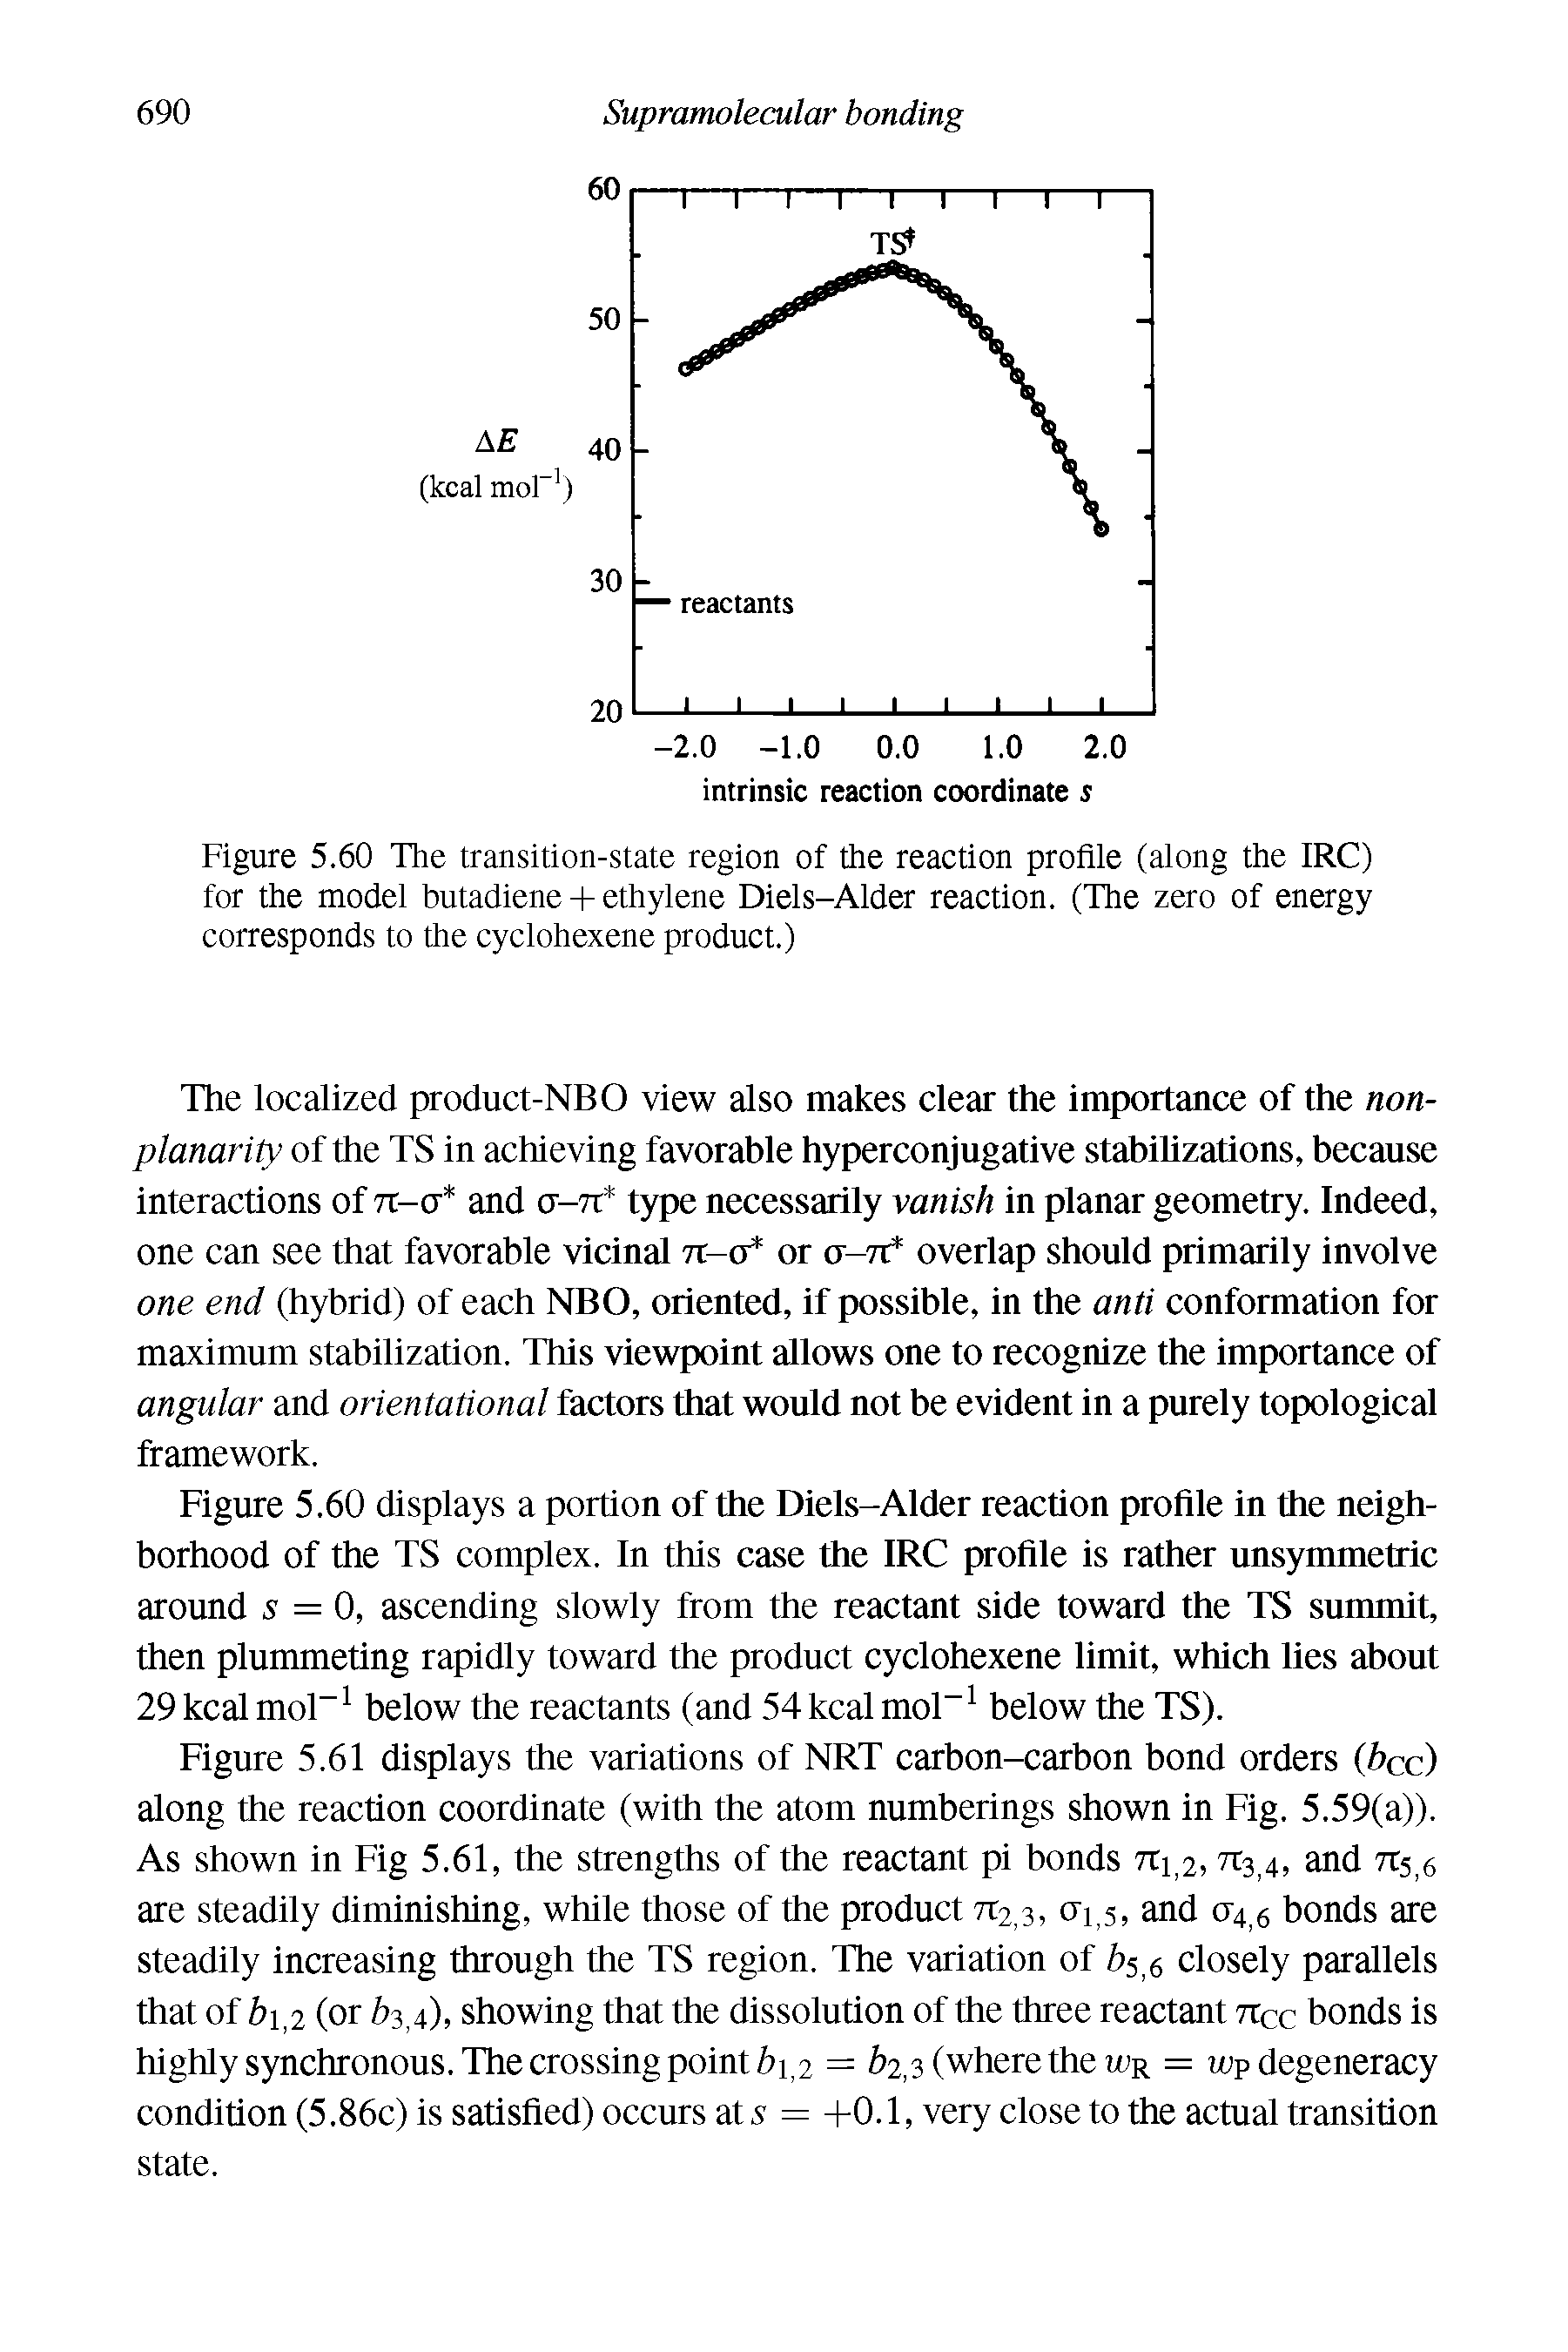 Figure 5.60 The transition-state region of the reaction profile (along the IRC) for the model butadiene + ethylene Diels-Alder reaction. (The zero of energy corresponds to the cyclohexene product.)...